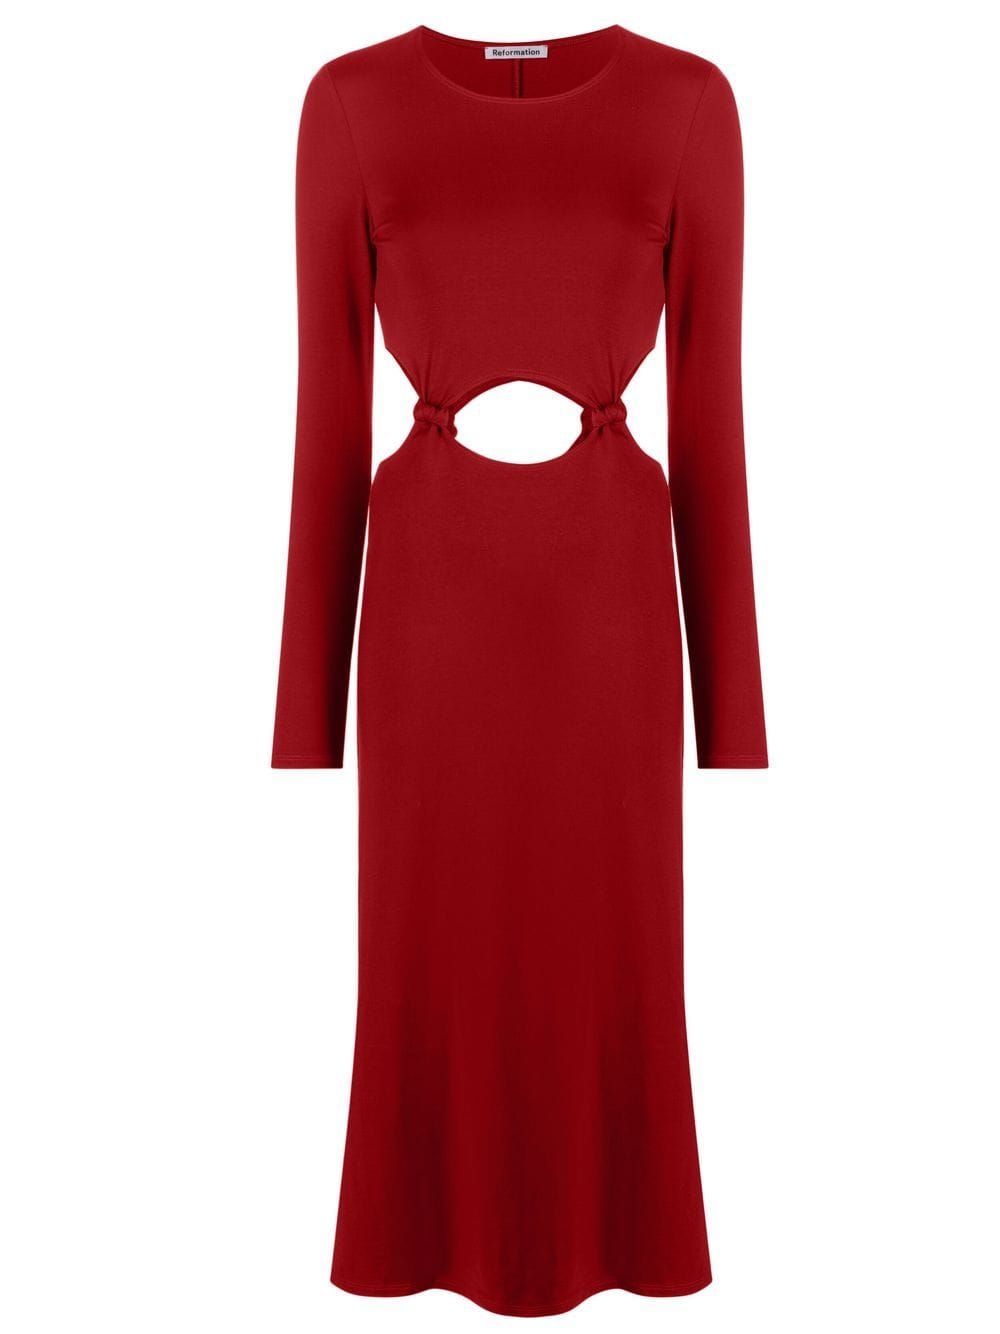 Reformation Via long-sleeve dress - Red